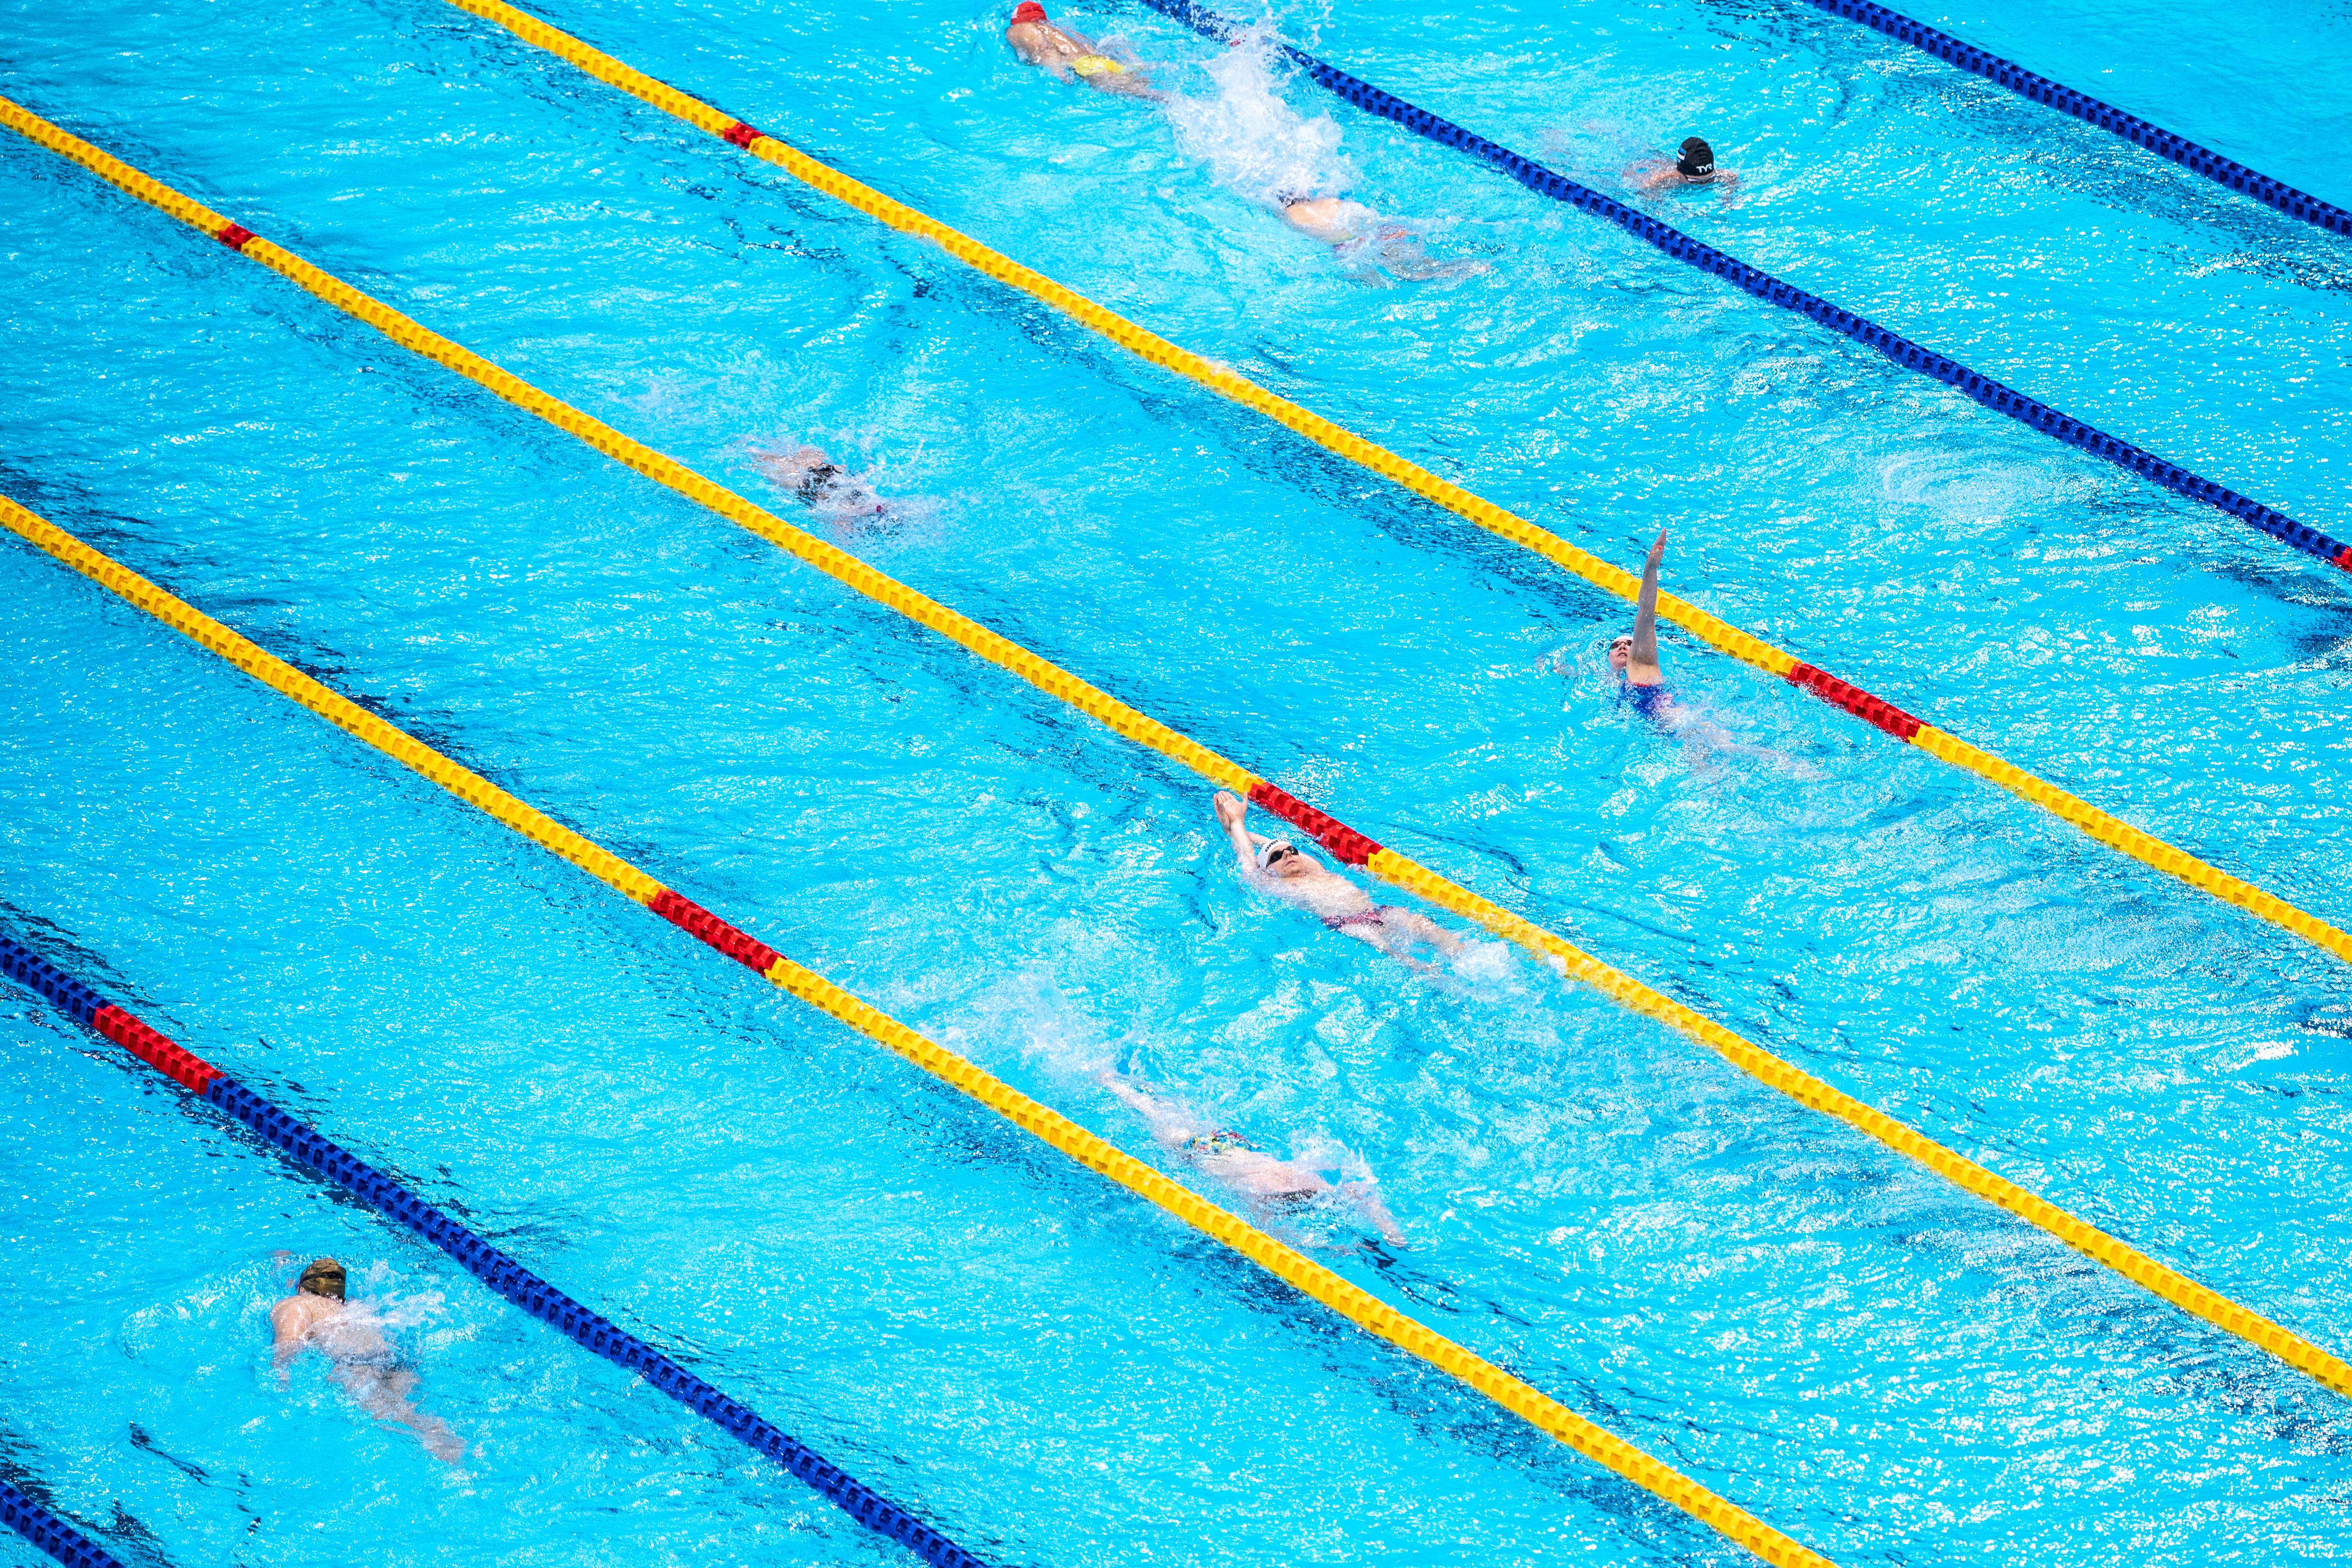 The Paralympic swimming codes are decided by a combination of stroke and impairment classification